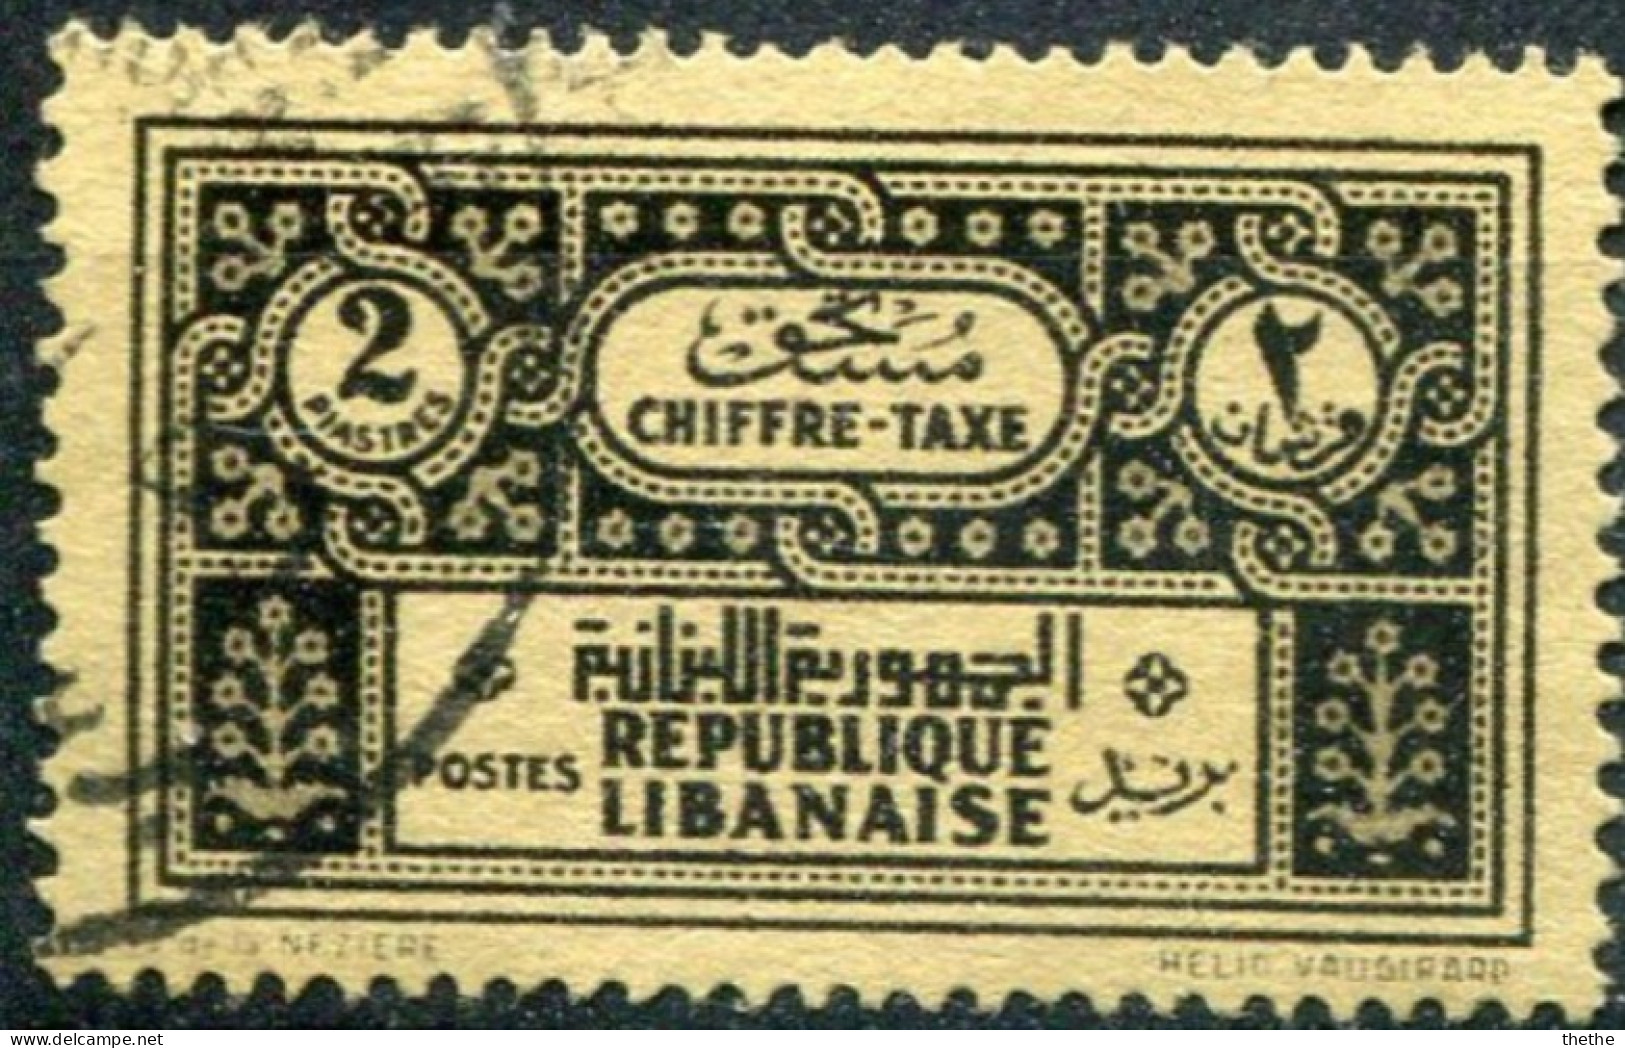 GRAND LIBAN - Chiffre-Taxe - Timbres-taxe